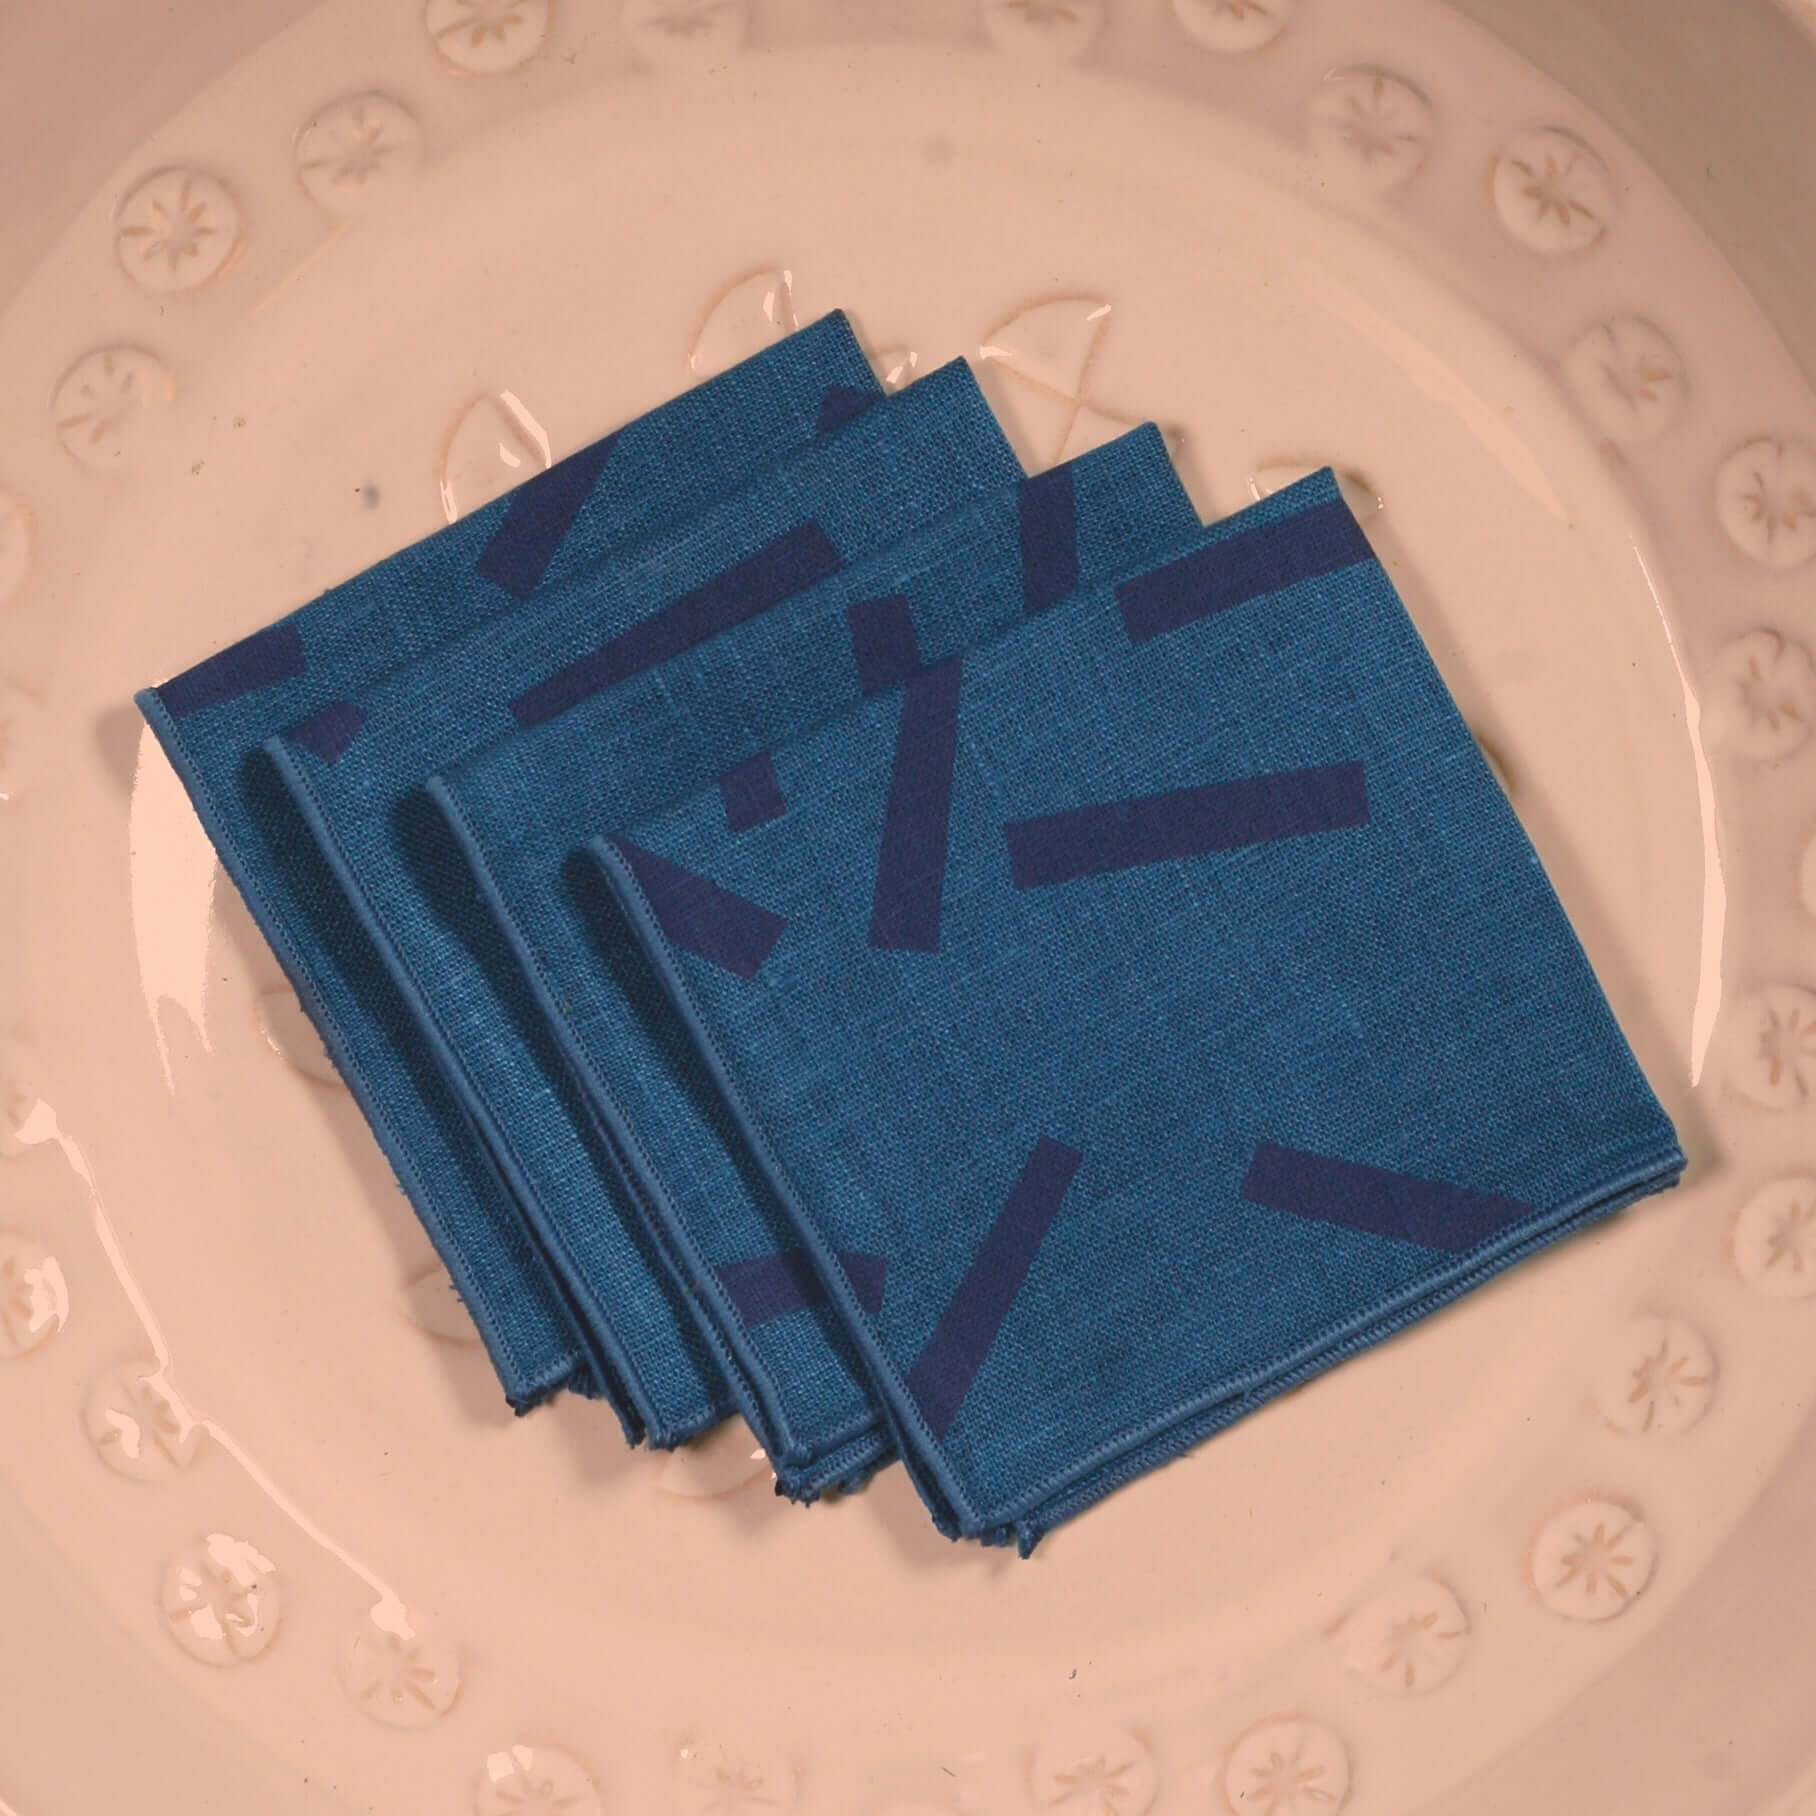 'Toss' Hand-Printed 100% Linen Cocktail Napkins in Blues, Set of 4